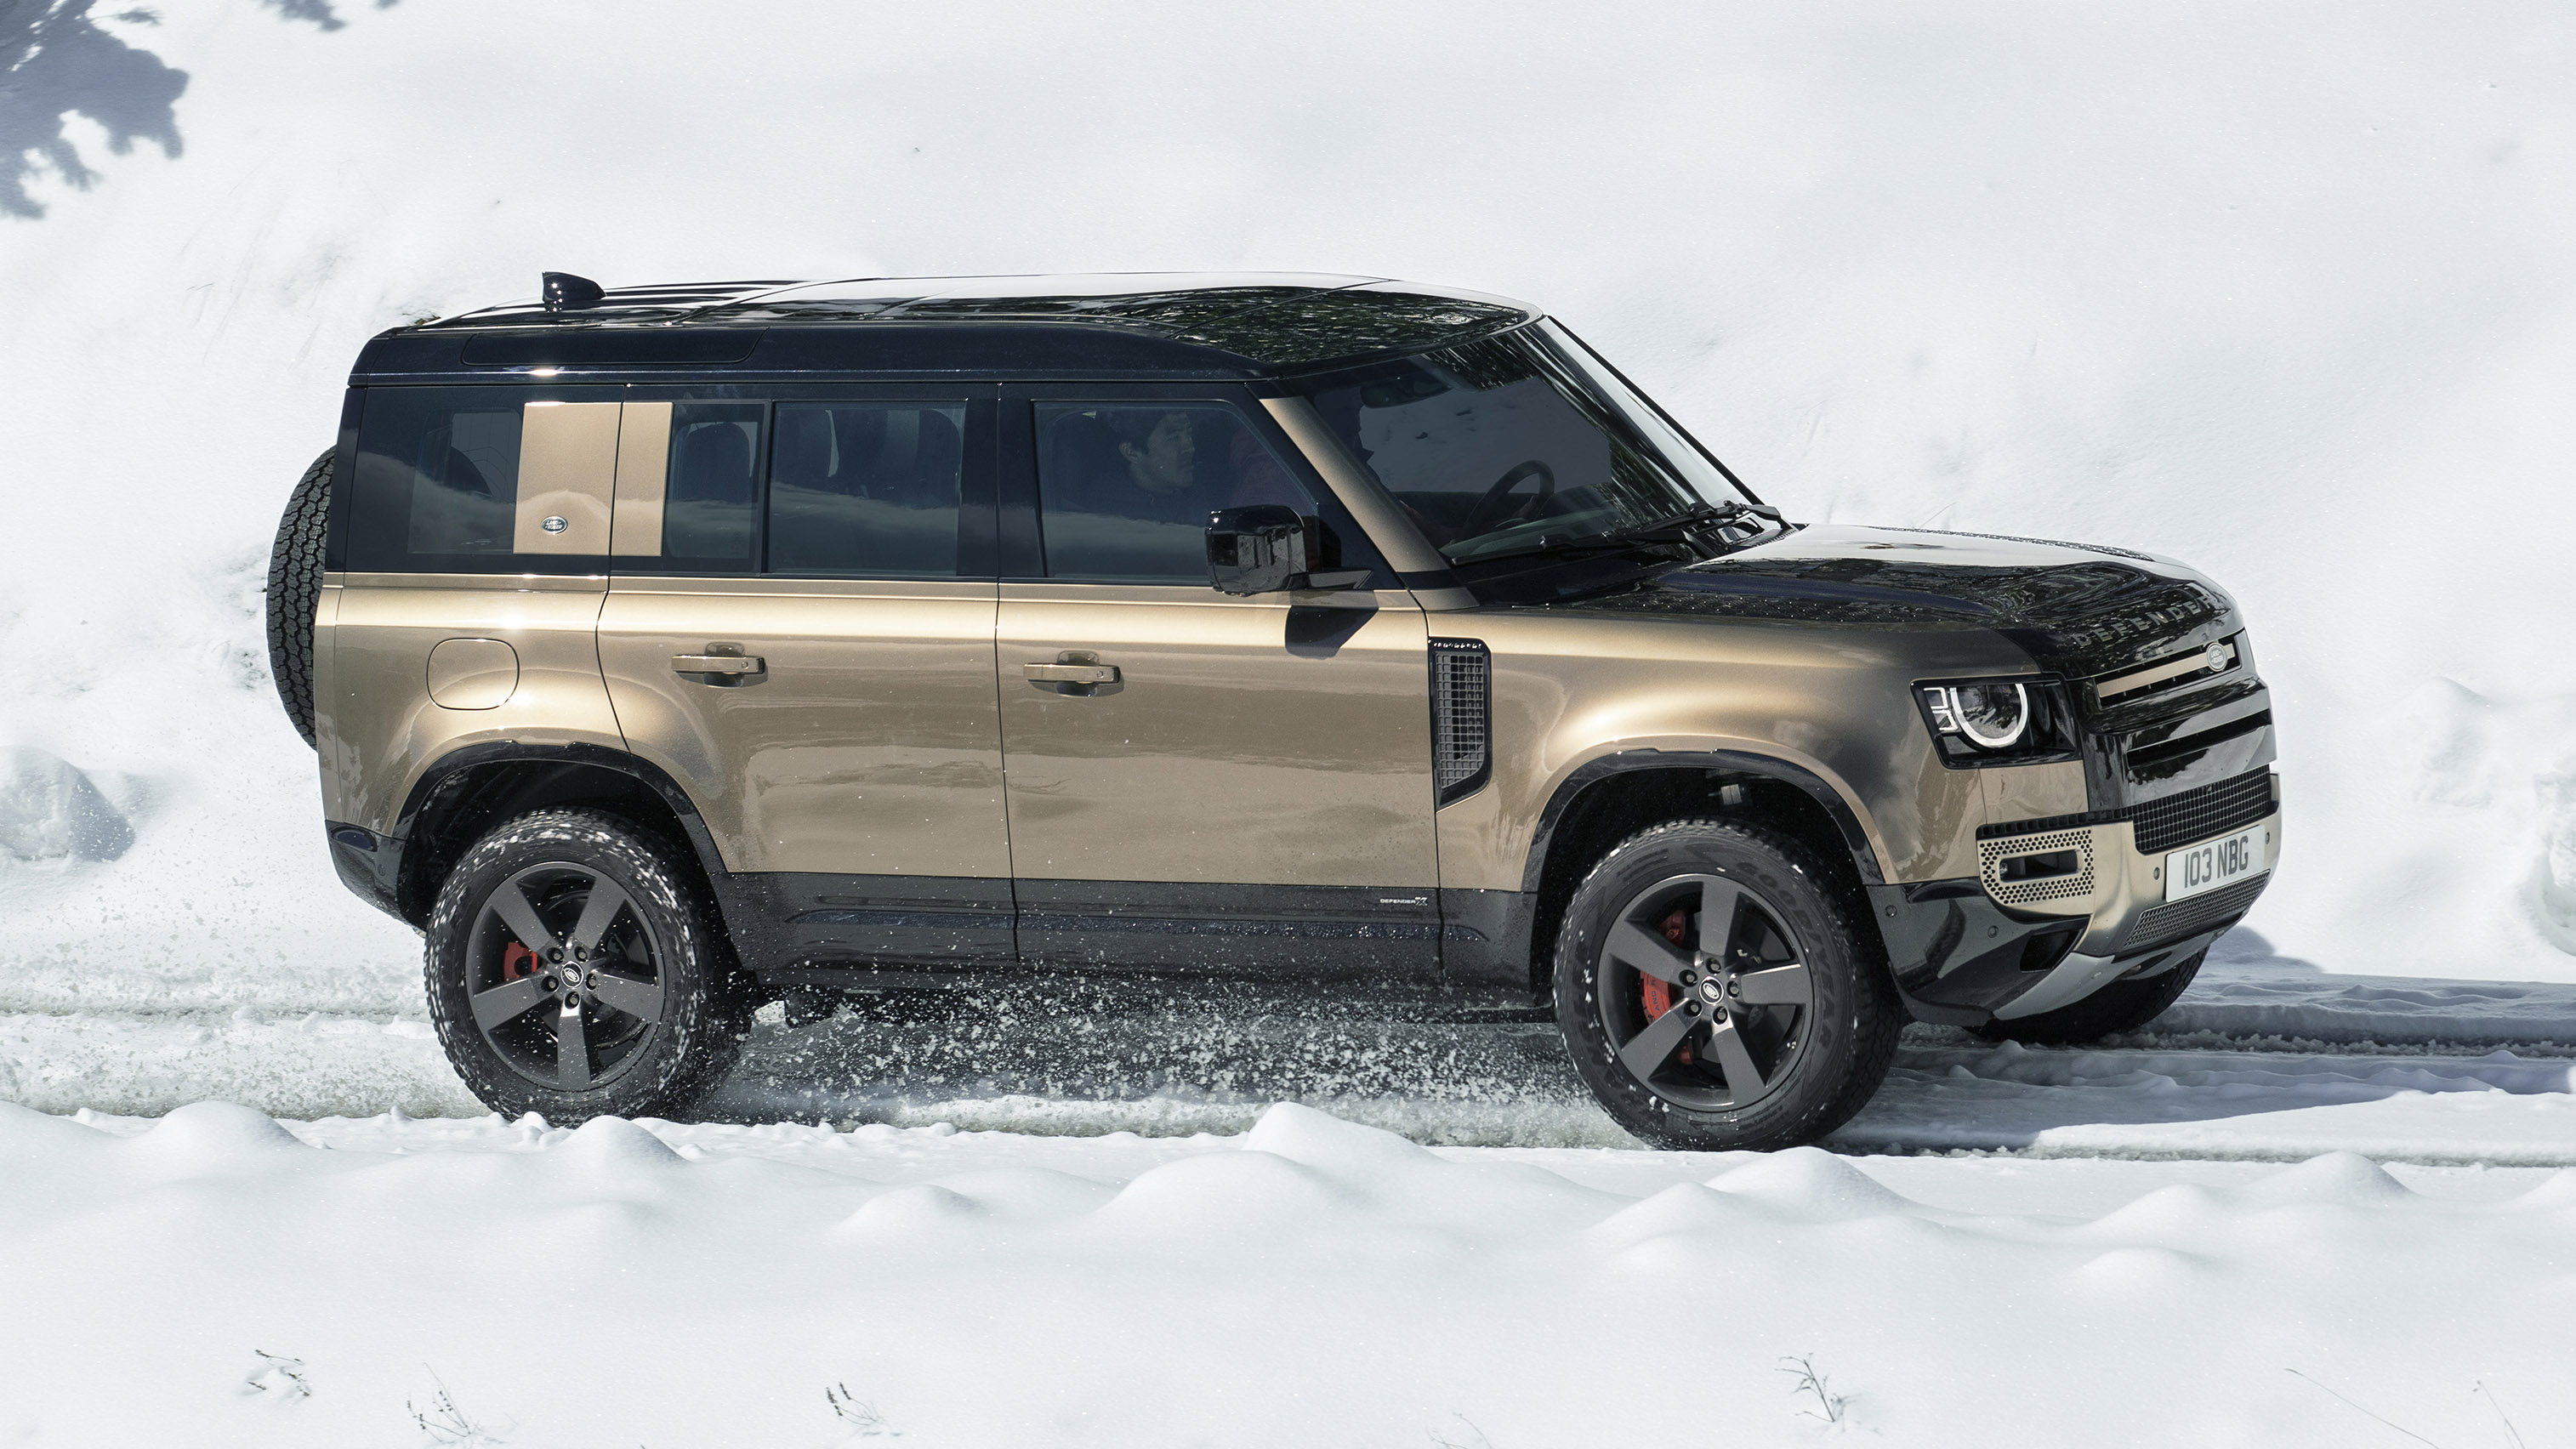 Car Land Rover Land Rover Defender Suv Snow Vehicle 3029x1704